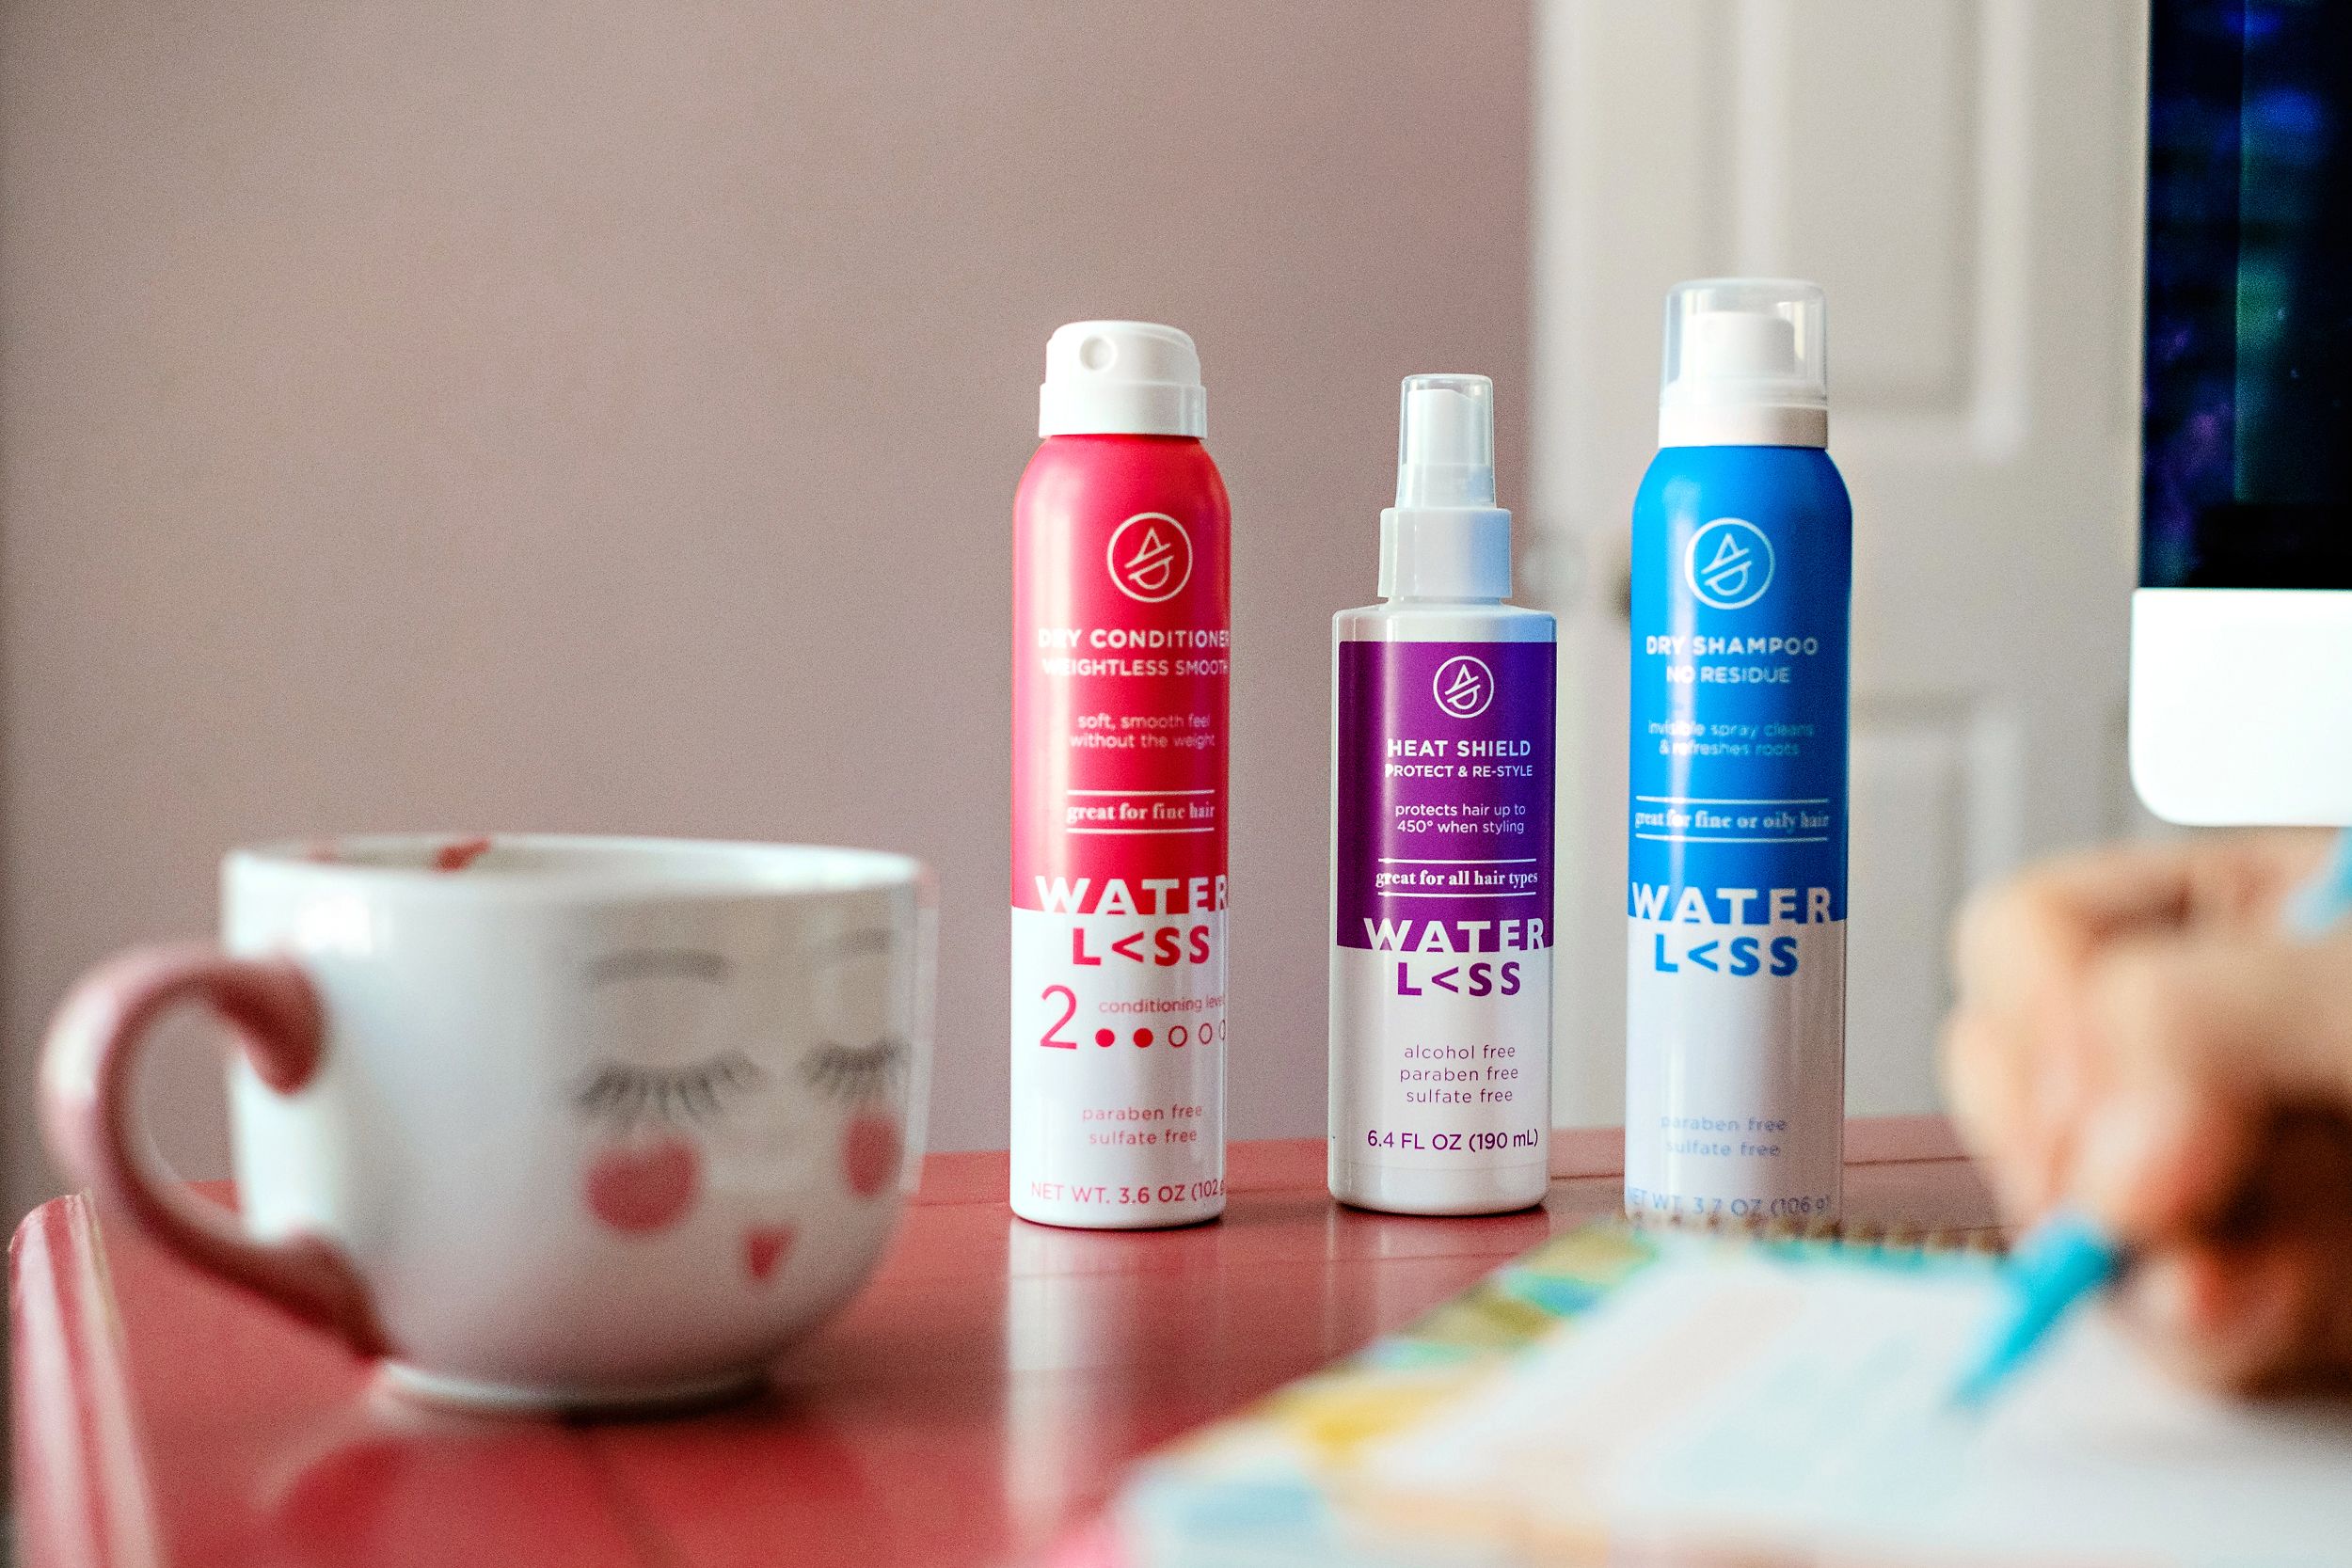 Curious how to get 5 days between washes? Popular Atlanta Blogger Happily Hughes is sharing her top tips to getting 5 day hair with waterl<ss HERE!